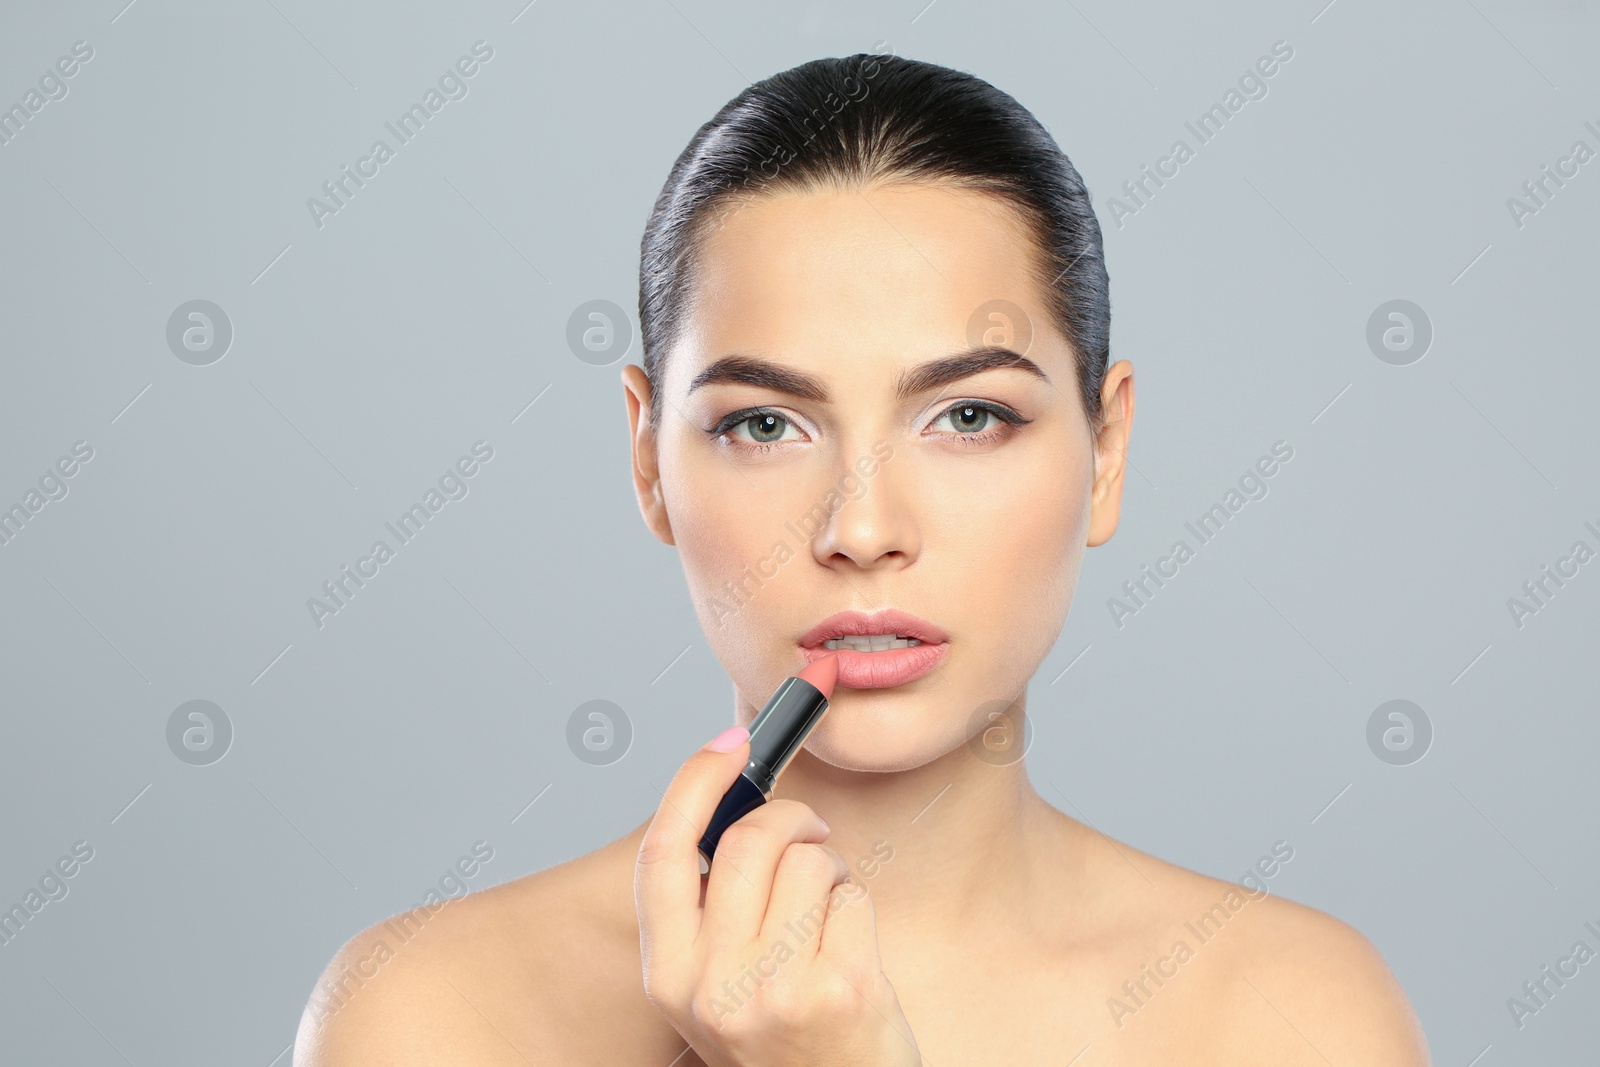 Photo of Young woman applying lipstick on color background